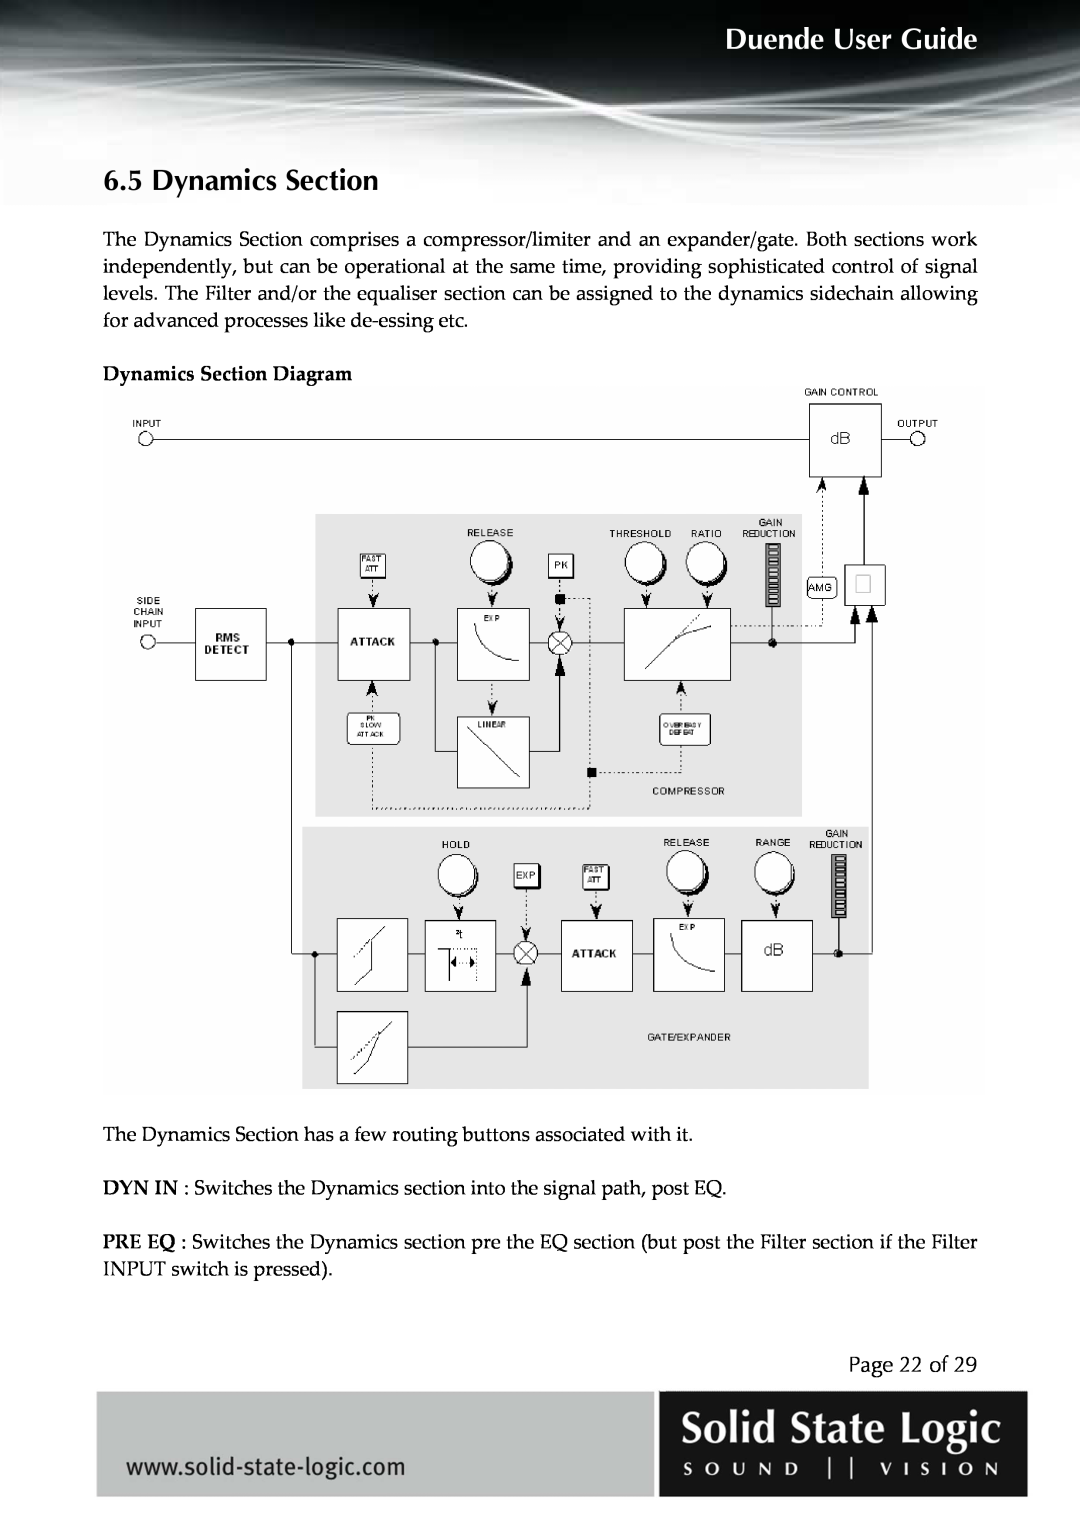 Solid State Logic DUENDE manual Dynamics Section, Page 22 of, Duende User Guide 